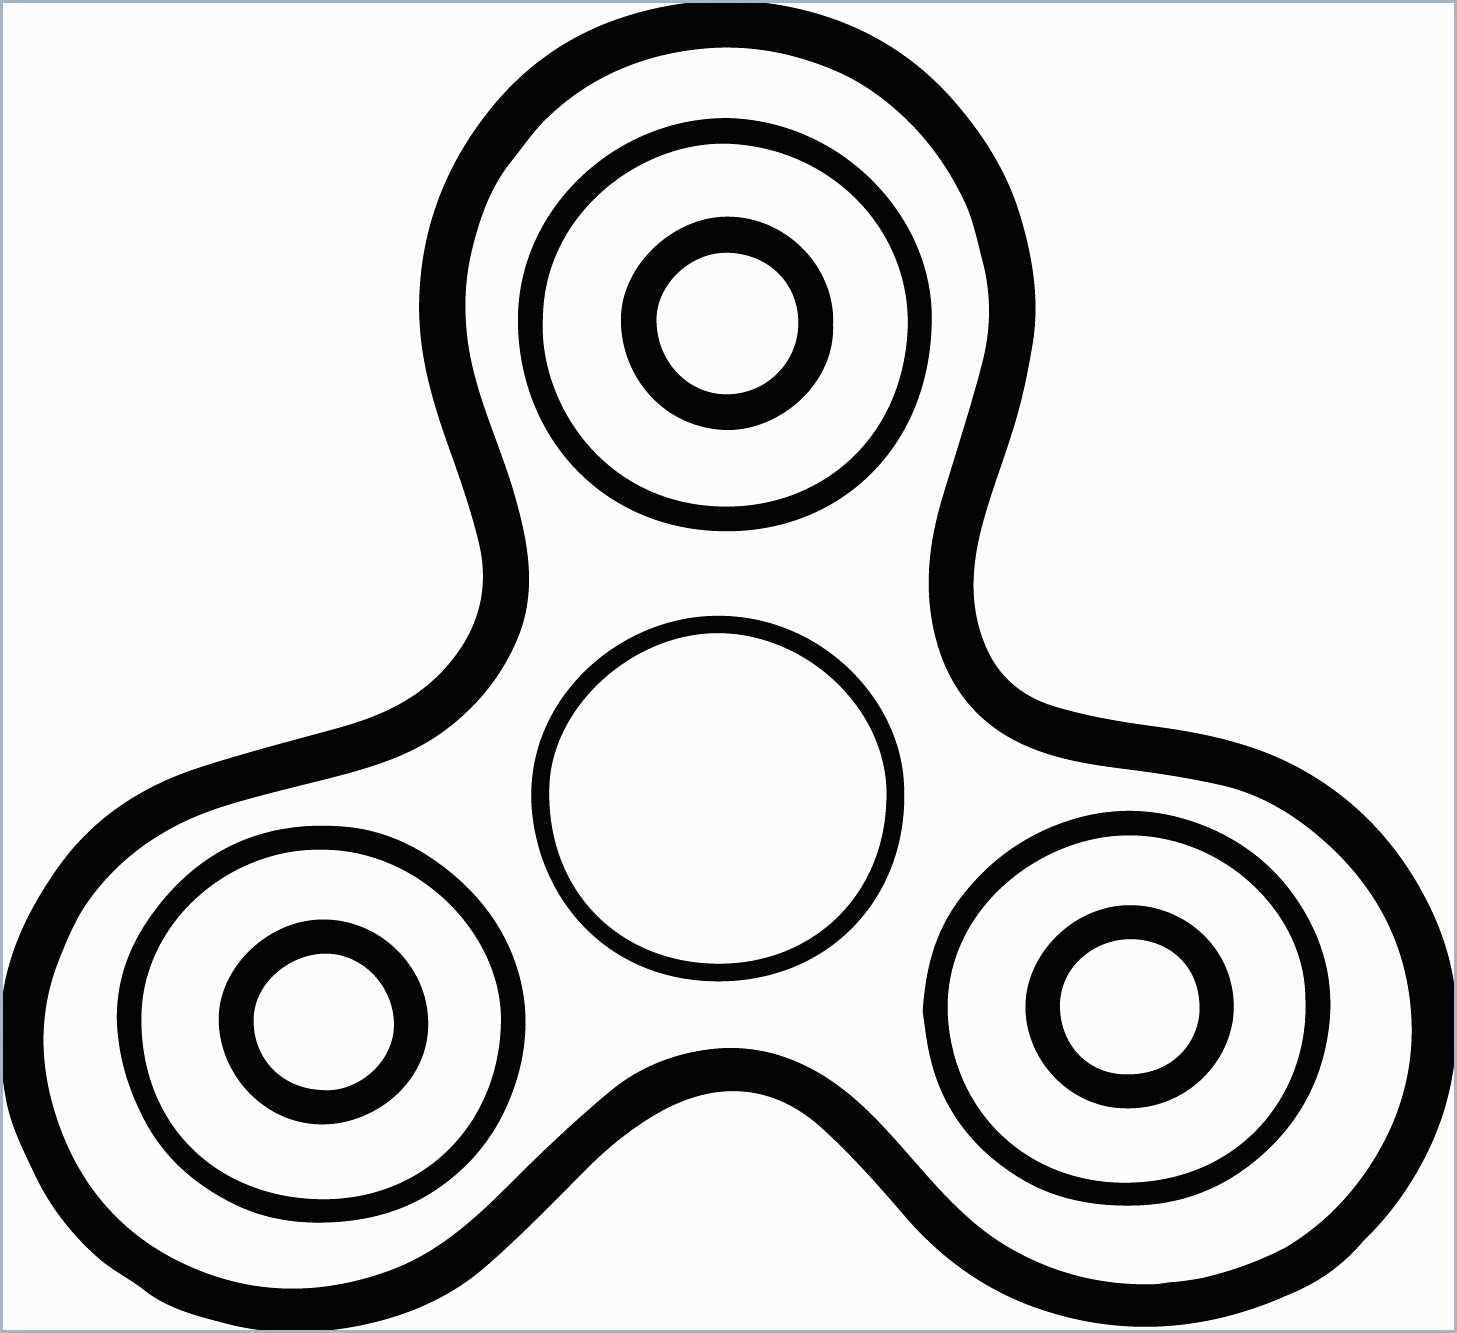 Coloring Pages Of Fidget Spinners Fidget Spinner Drawing Free Download Best Fidget Spinner Drawing